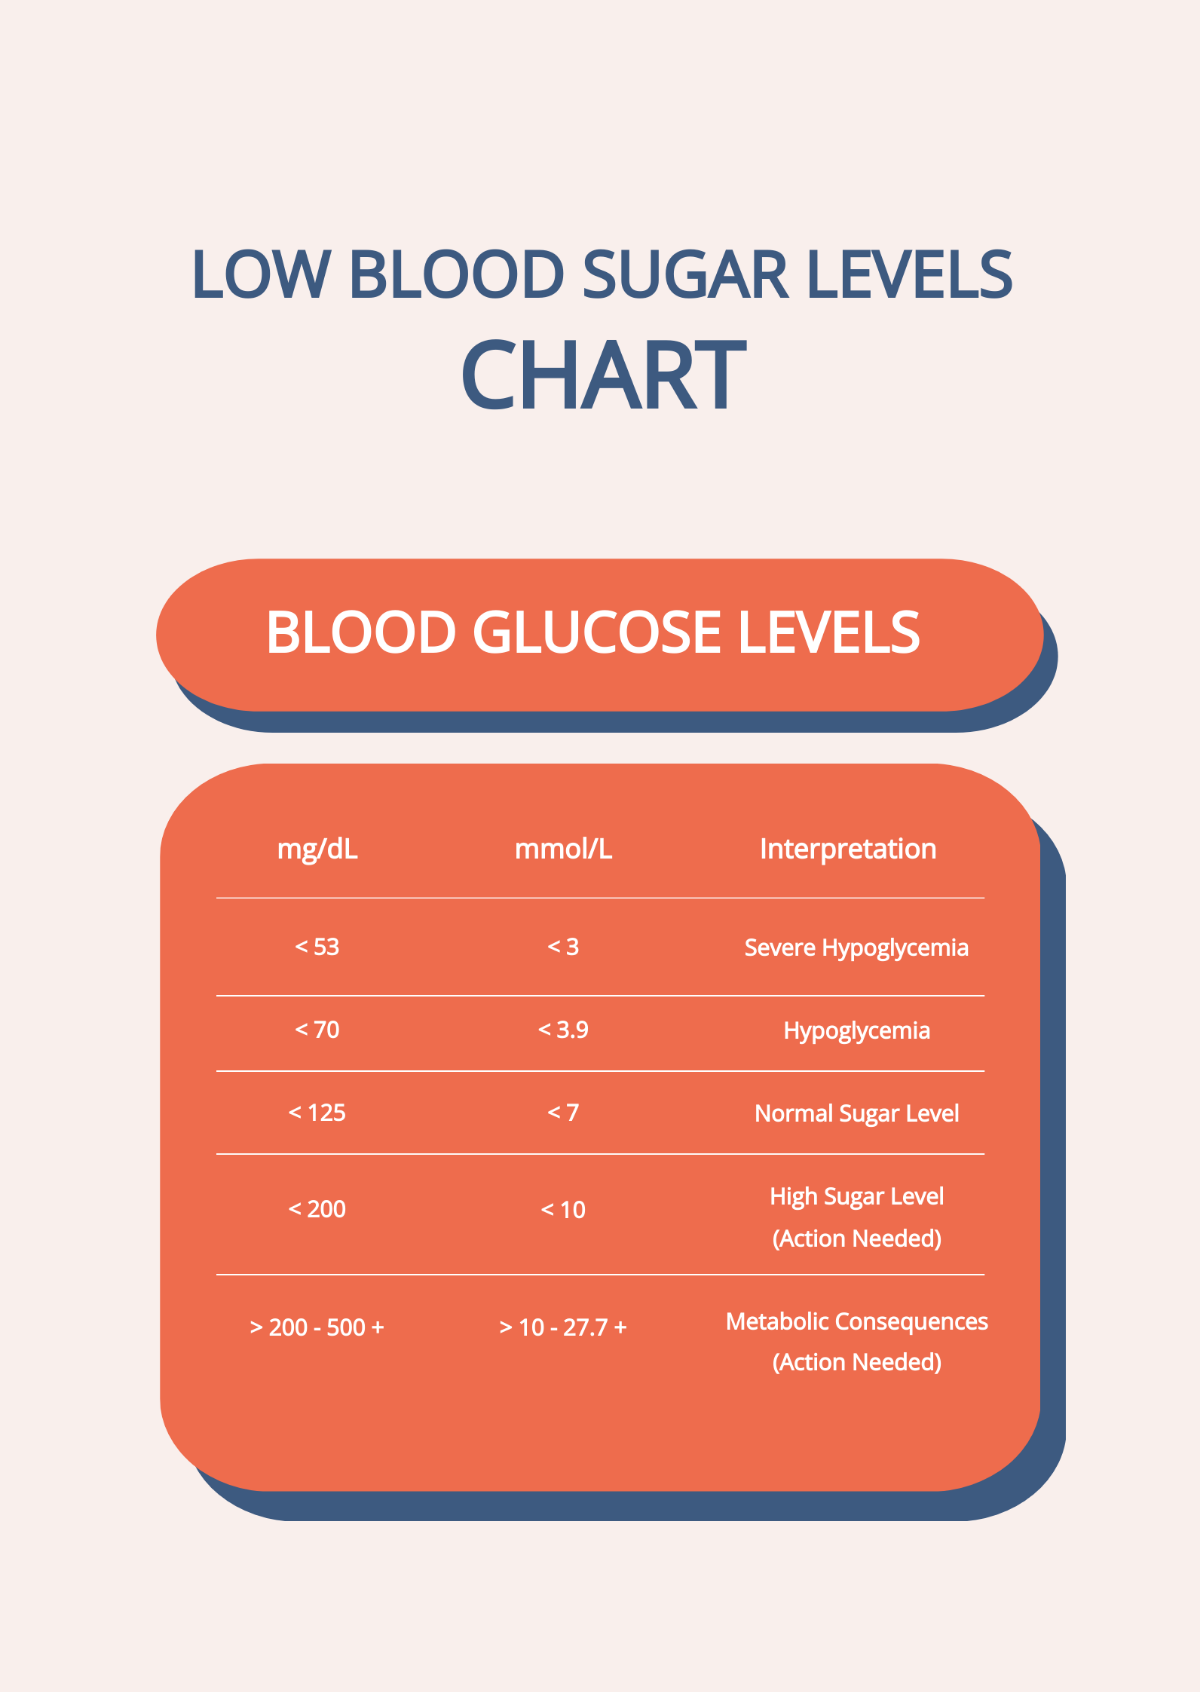 Low Blood Sugar Levels Chart Template